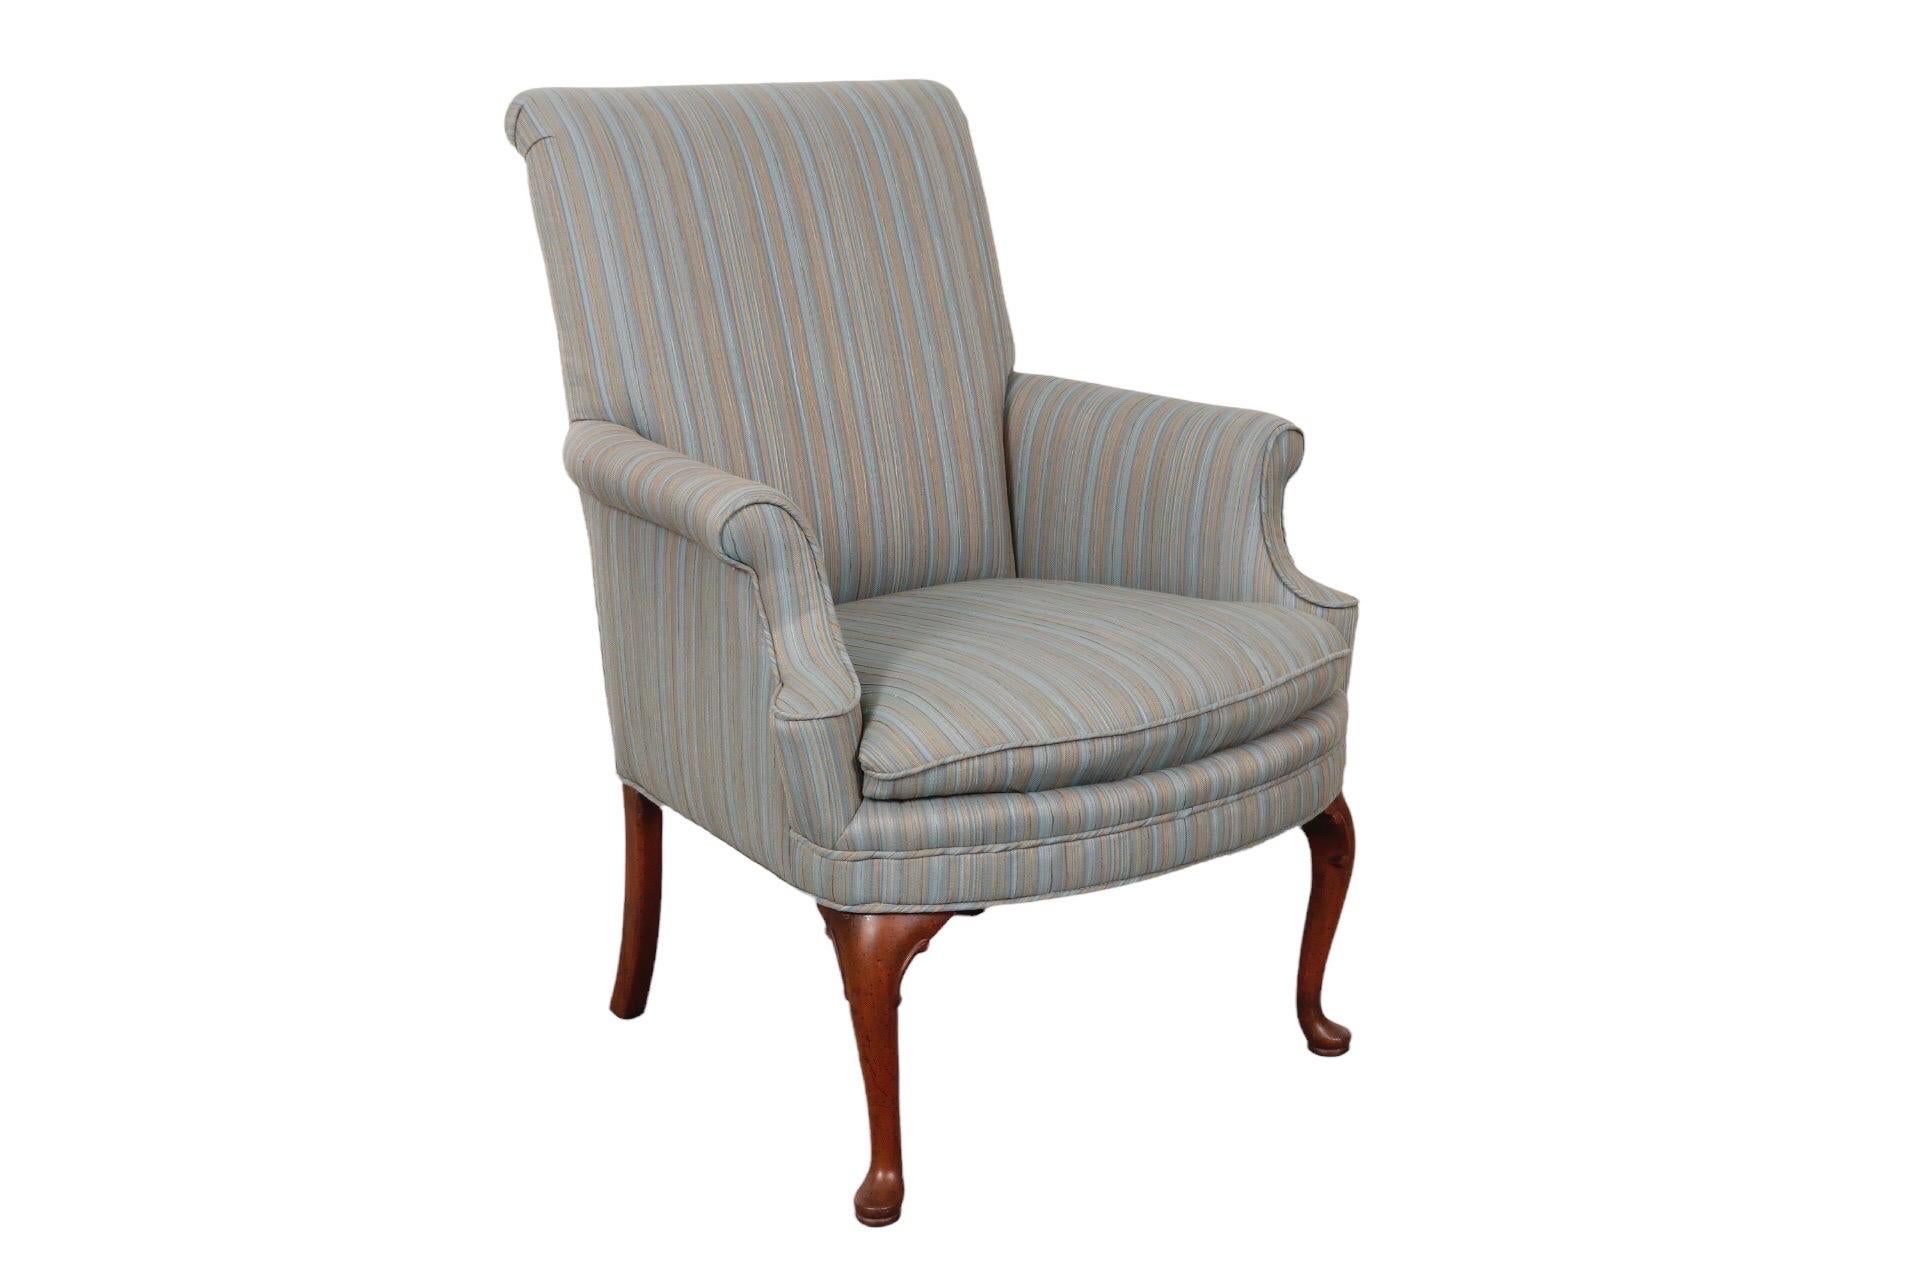 A Queen Anne style upholstered armchair. The horseshoe shaped seat is framed with outward rolled arms and a gently reclining back, topped with a flat crest rail. Upholstered in a vintage blue strie basket weave fabric threaded with brown and yellow